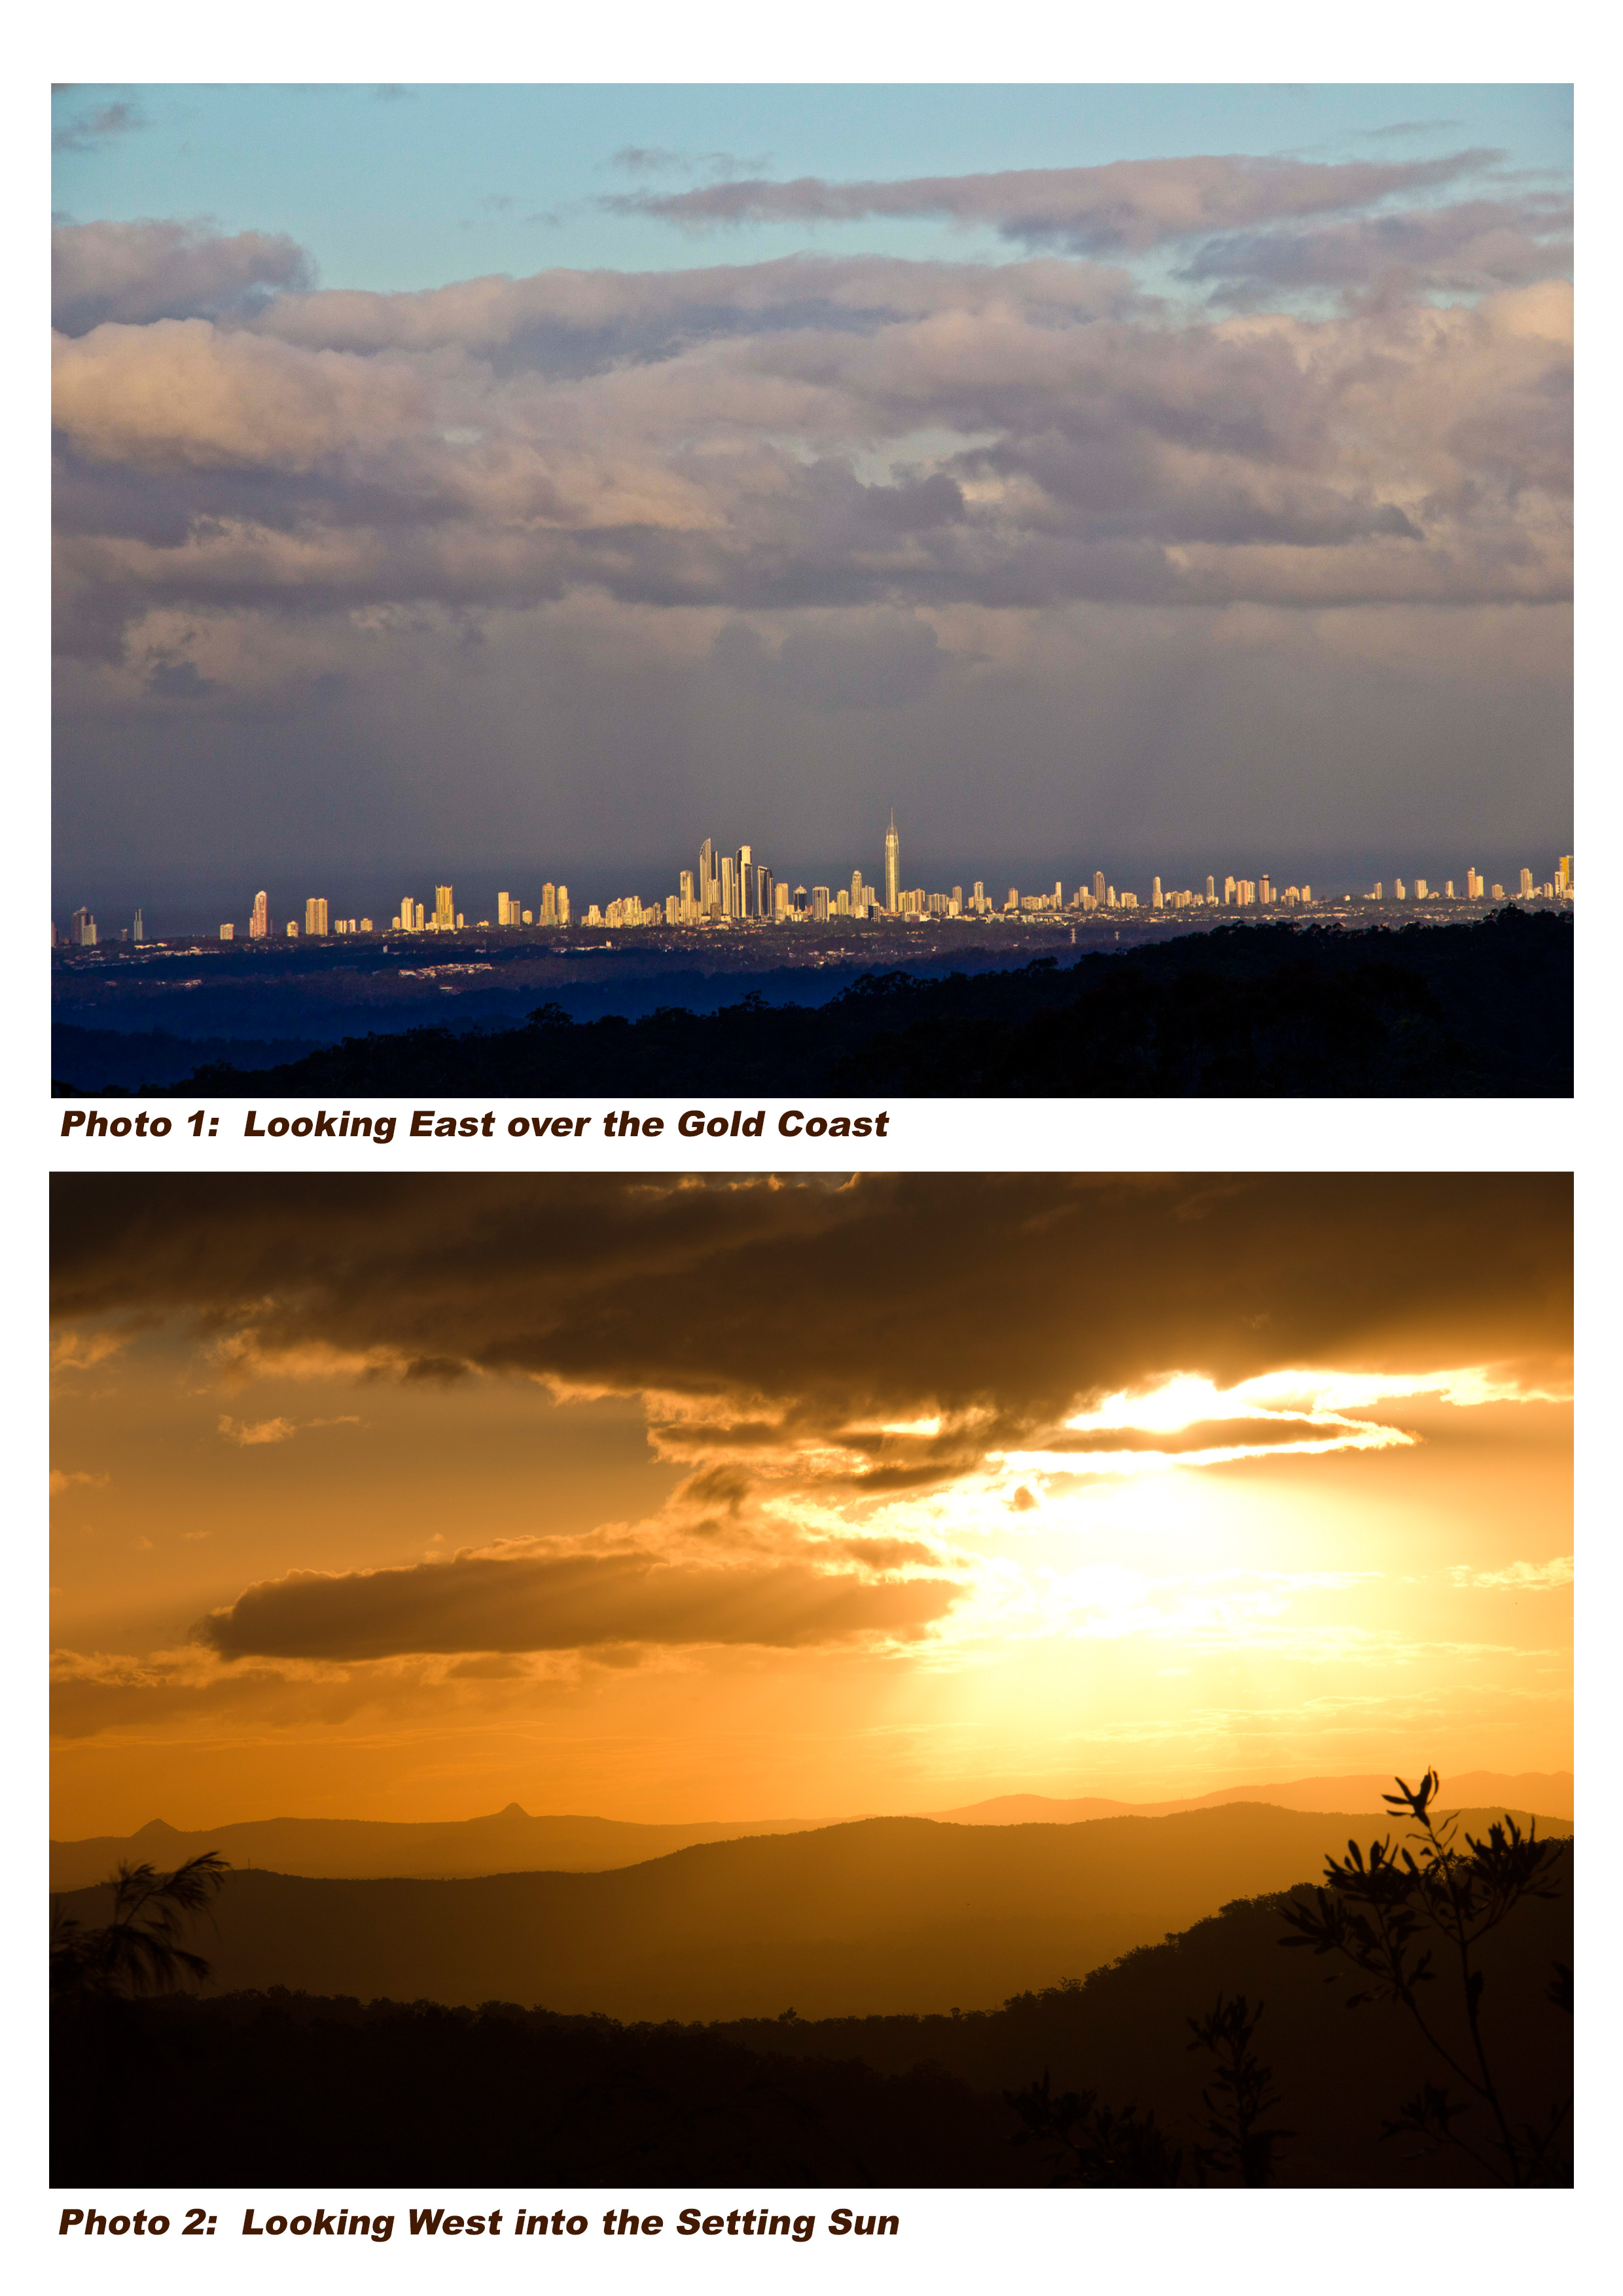 TT LY JUN) ren Lah LL

Photo 1: Looking East over the Gold Coast

Photo 2: Looking West into the Setting Sun